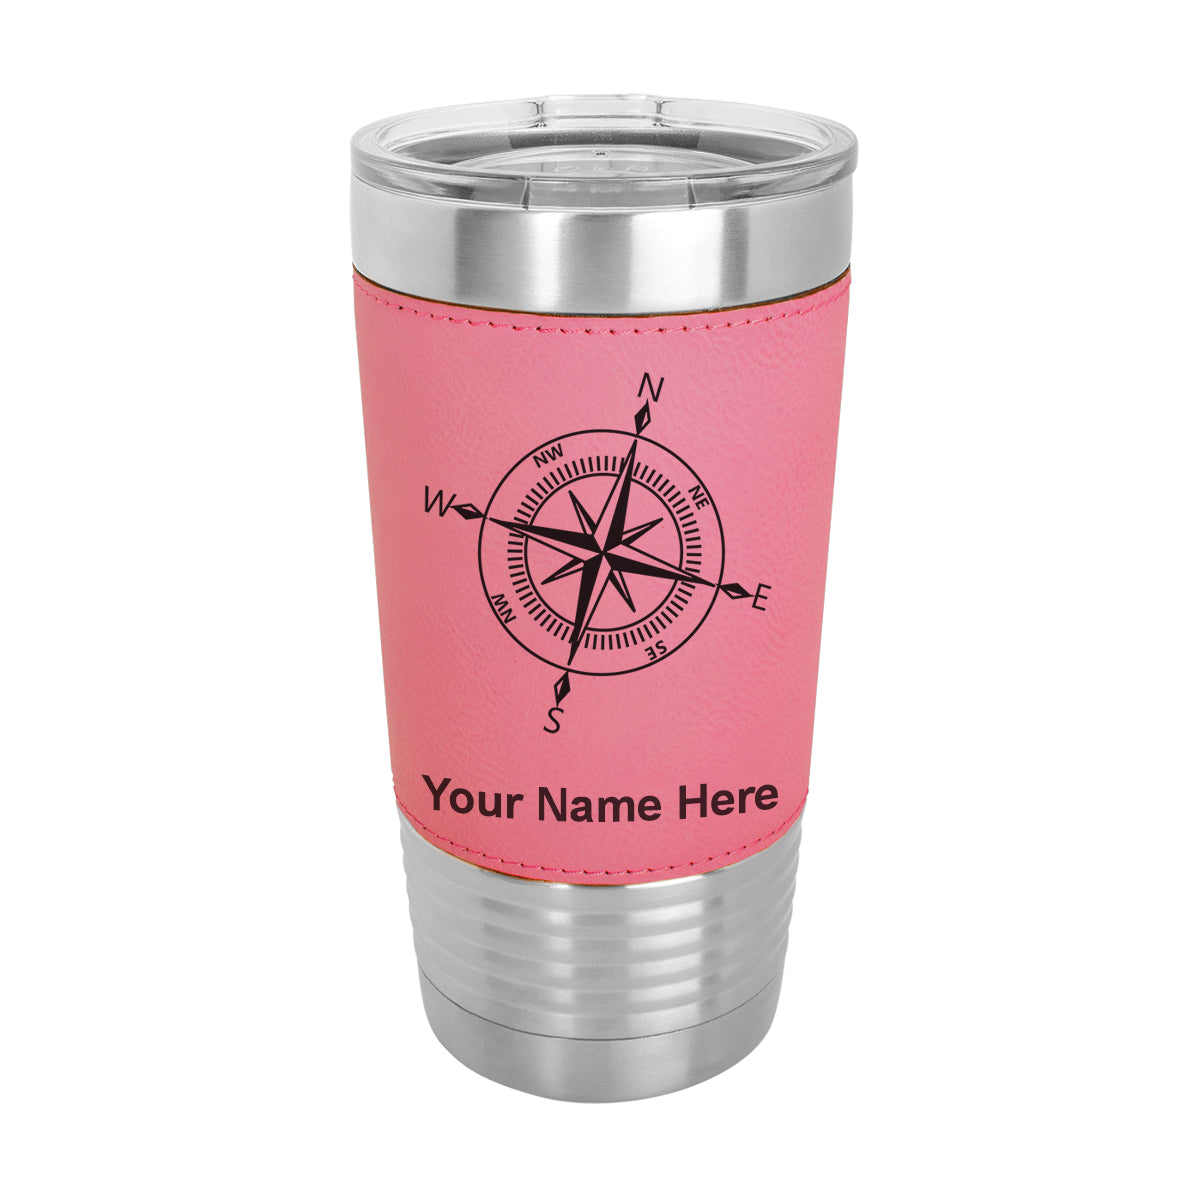 20oz Faux Leather Tumbler Mug, Compass Rose, Personalized Engraving Included - LaserGram Custom Engraved Gifts